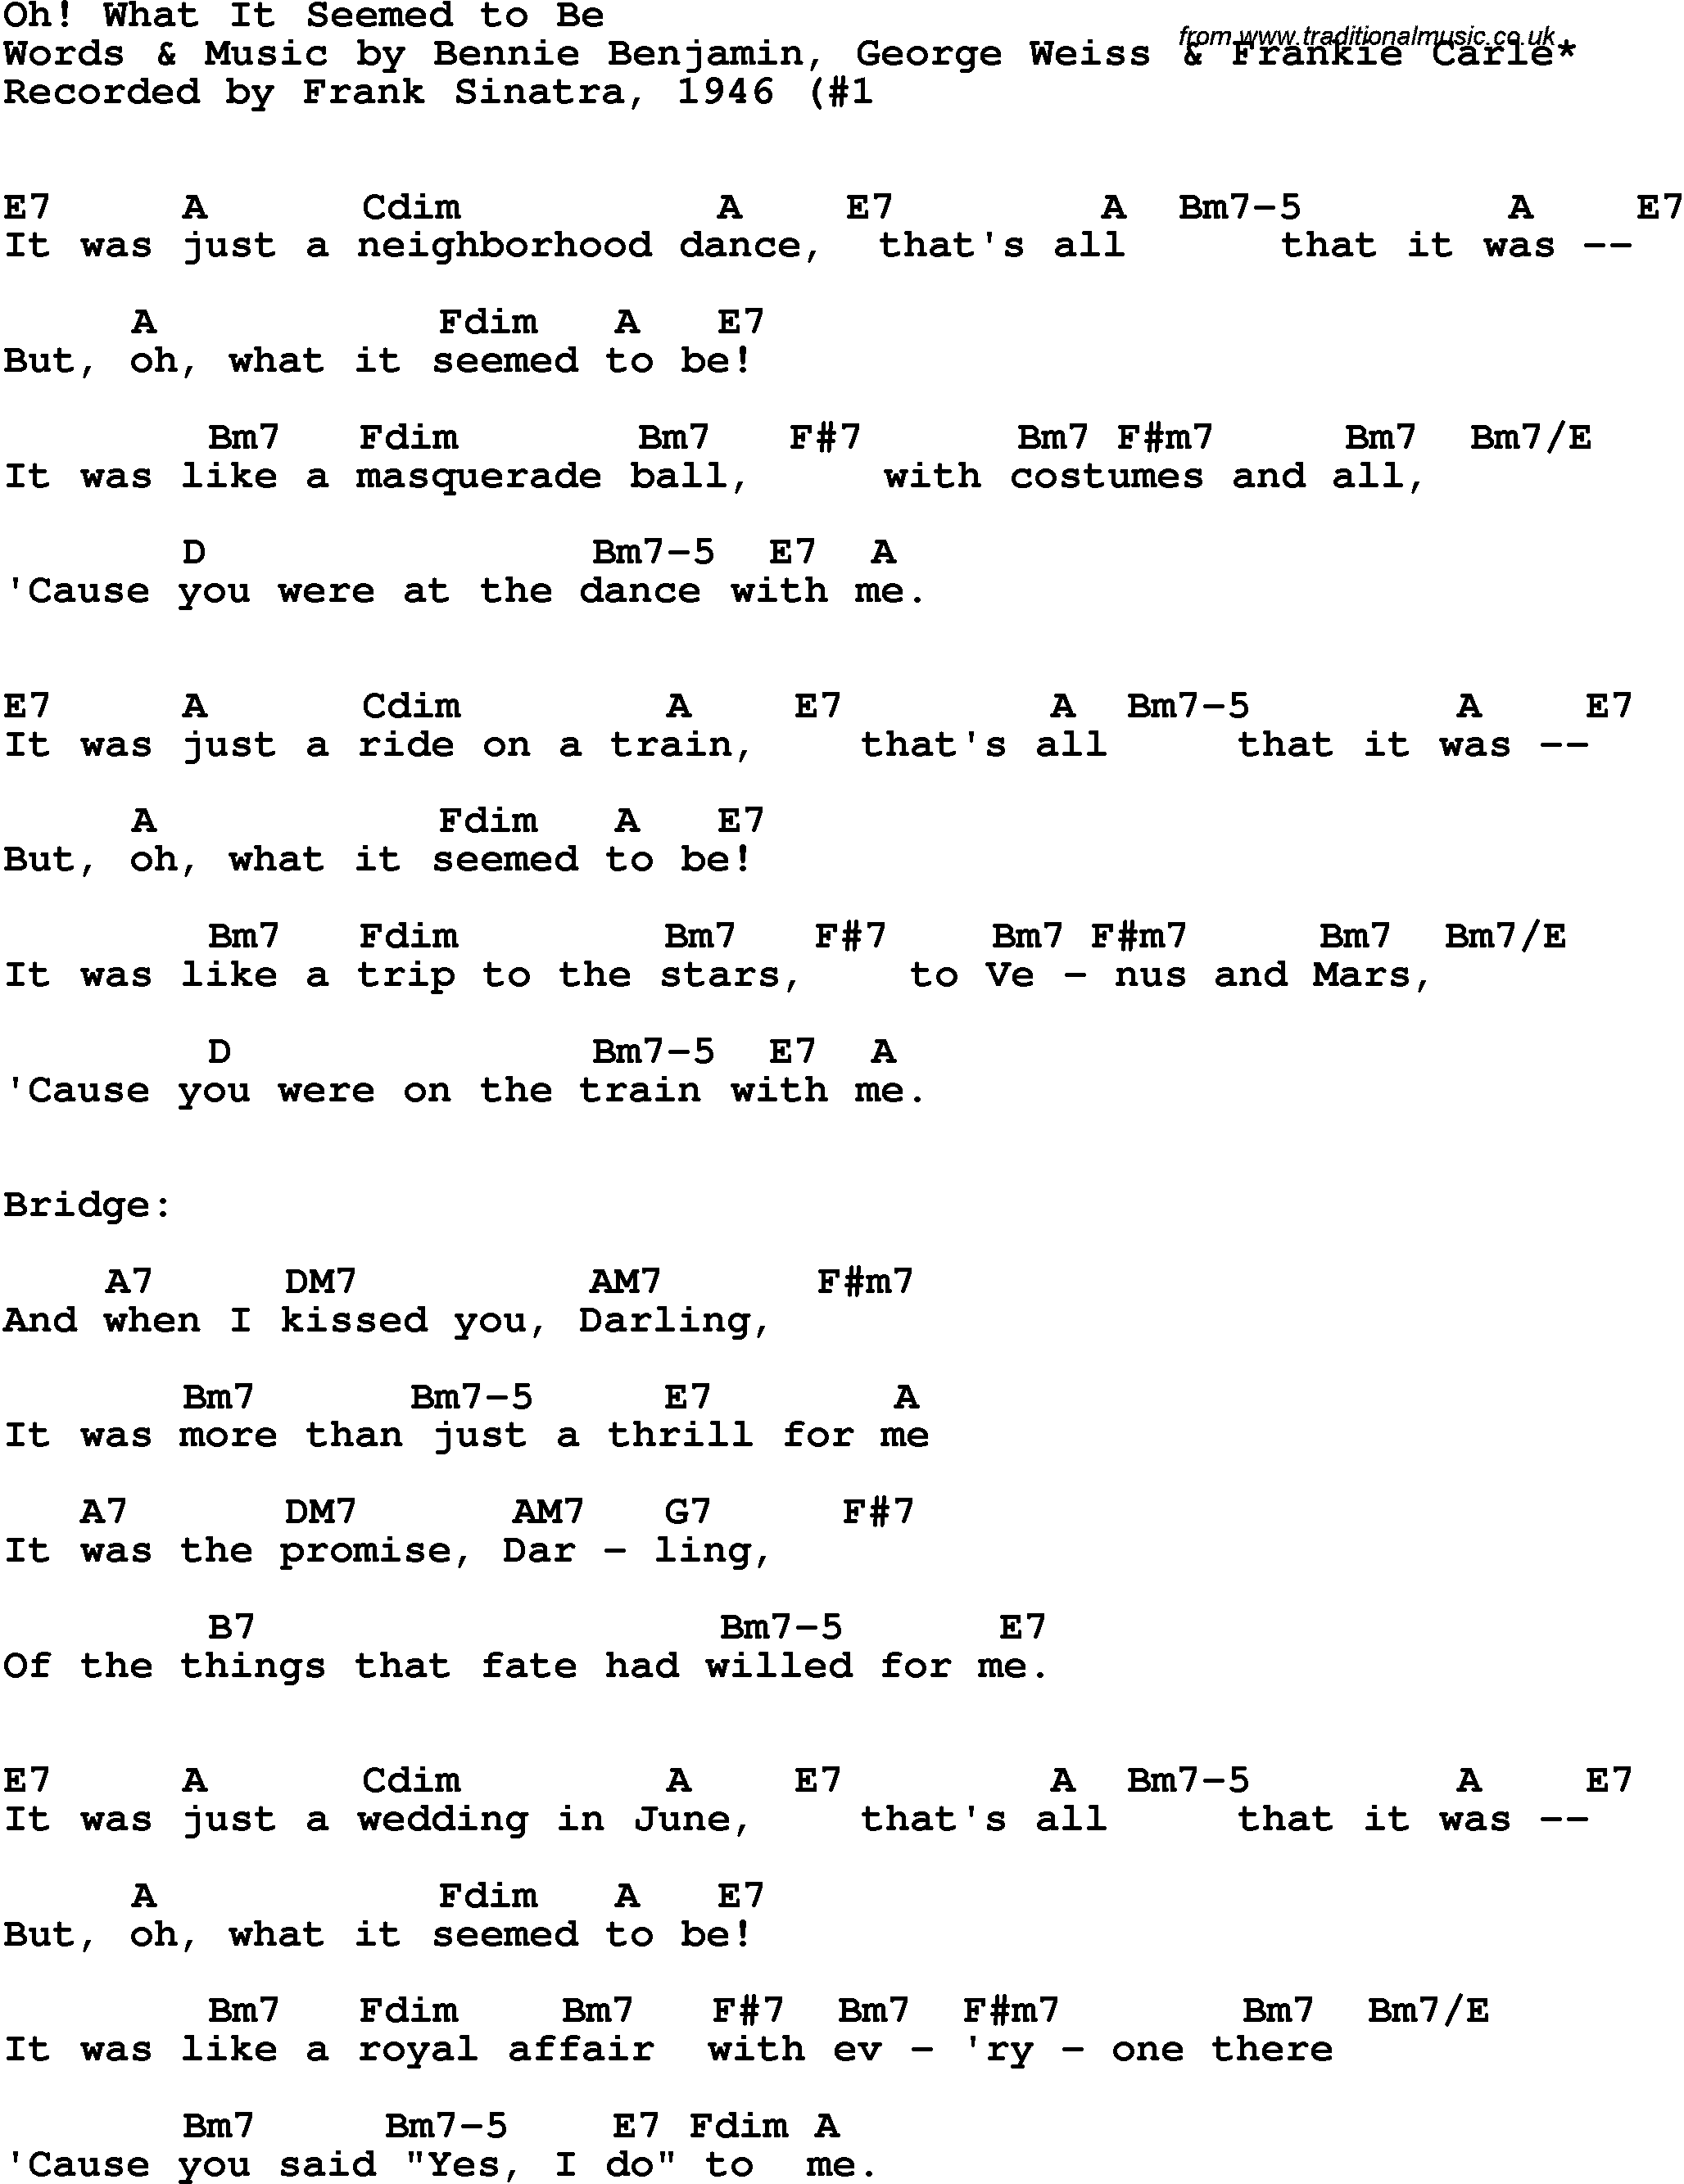 Song Lyrics with guitar chords for Oh! What It Seemed To Be - Frank Sinatra, 1946